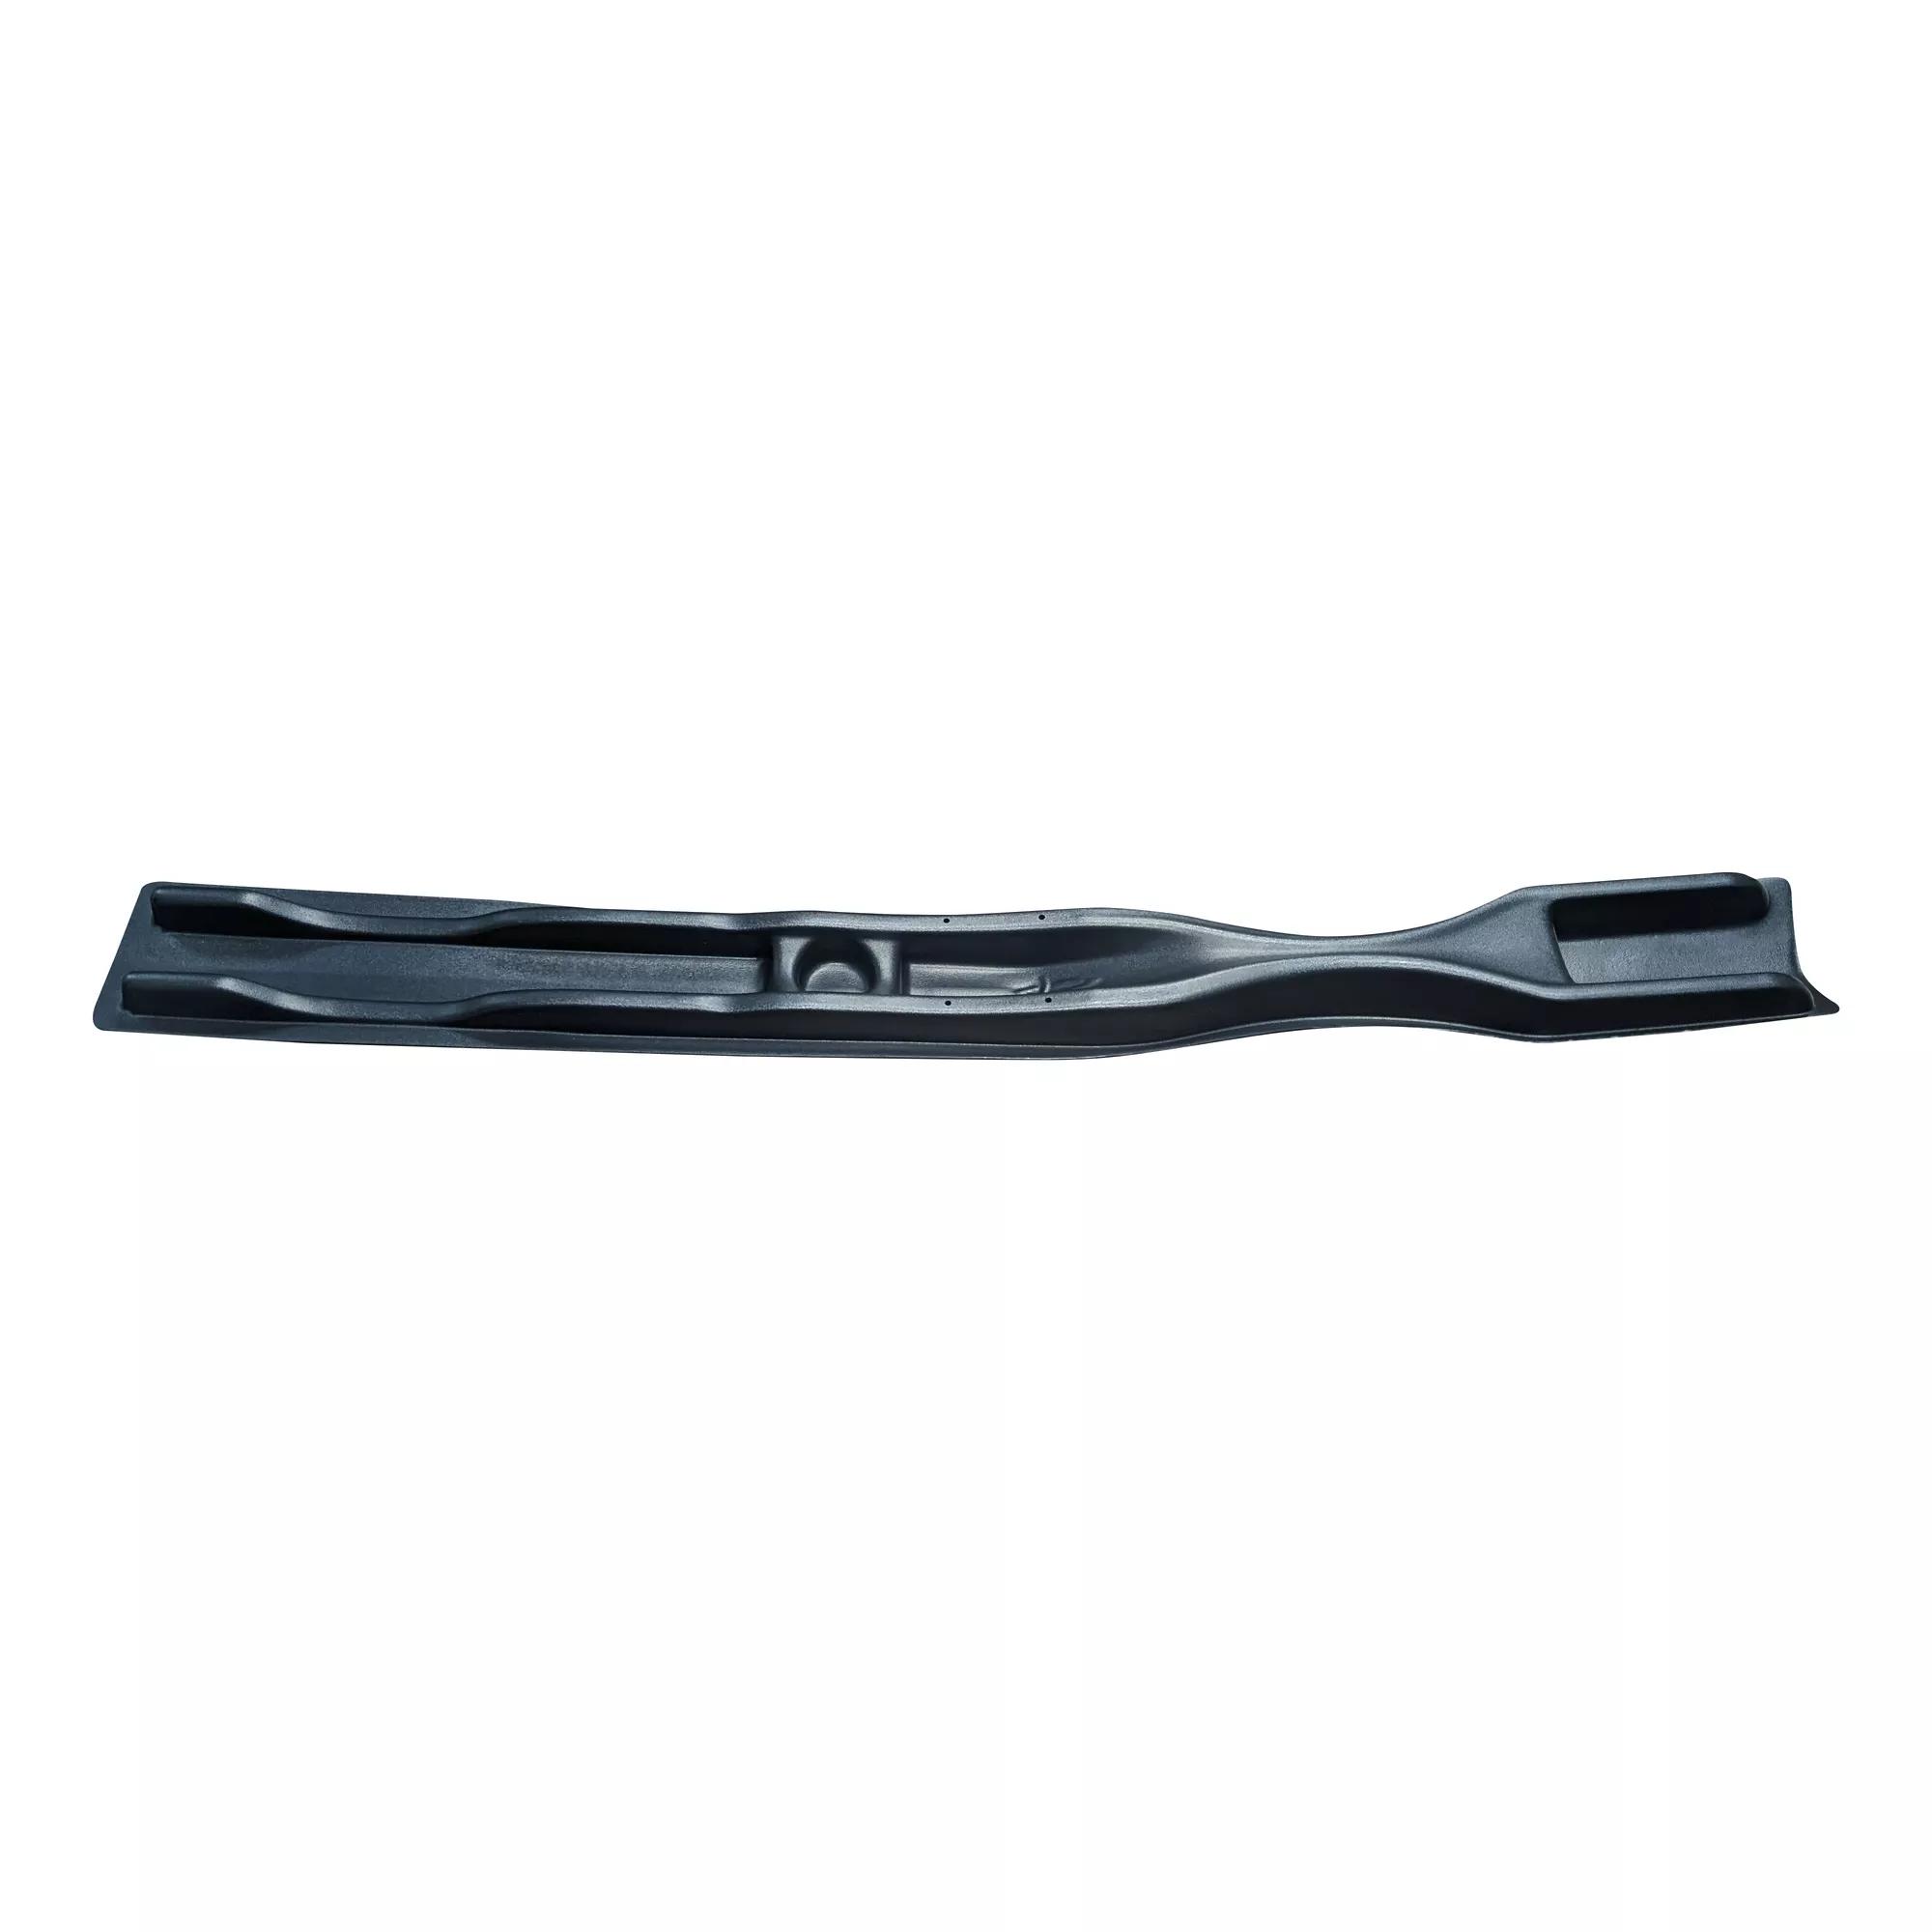 DAGGER - Hull Support Channel - For Axis Kayak Seat -  - 9800376 - TOP 